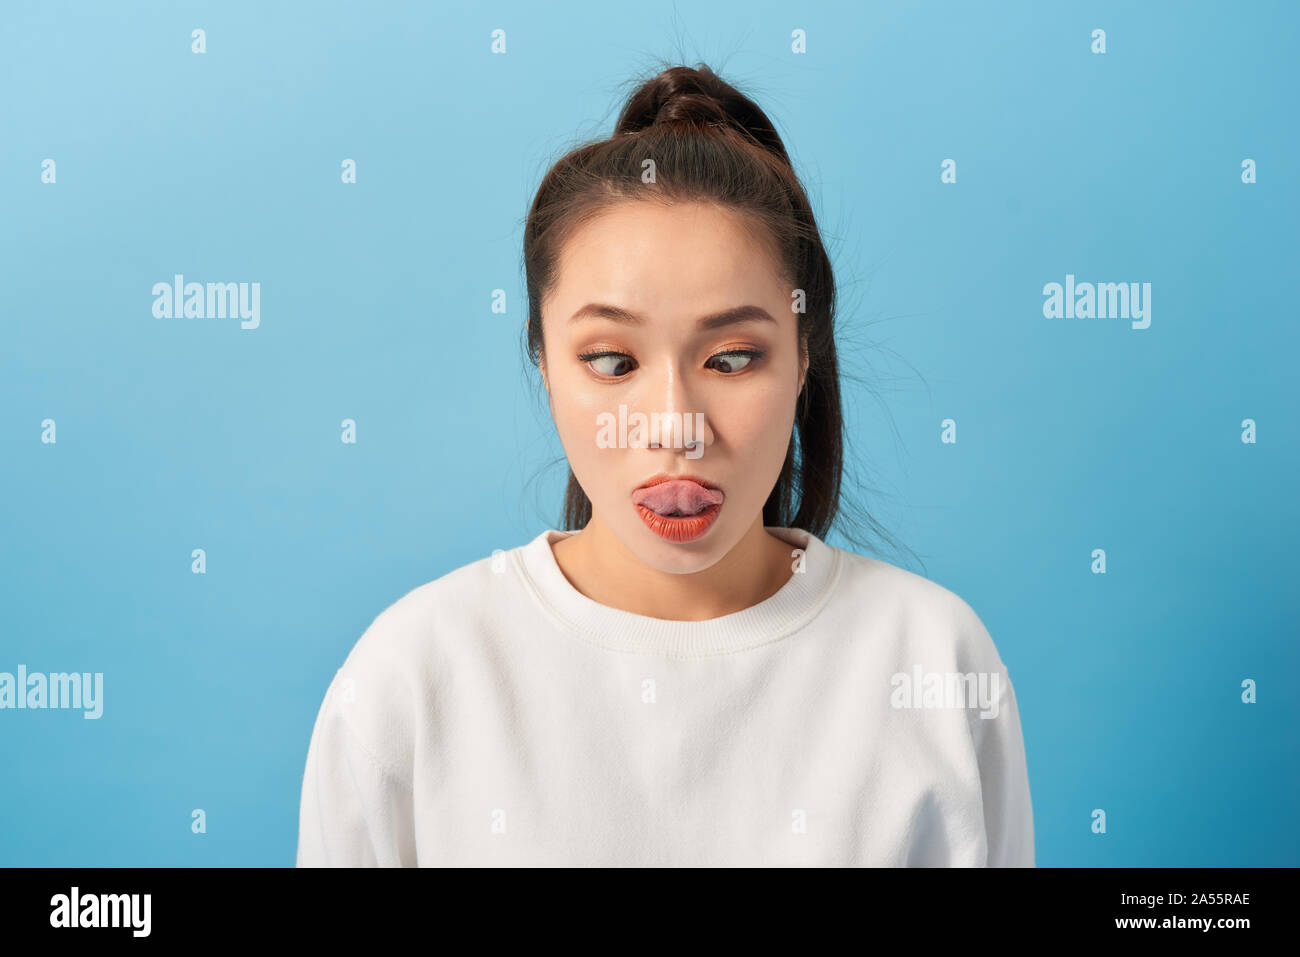 A young woman grimaces at the camera. Funny woman fooling around Stock Photo